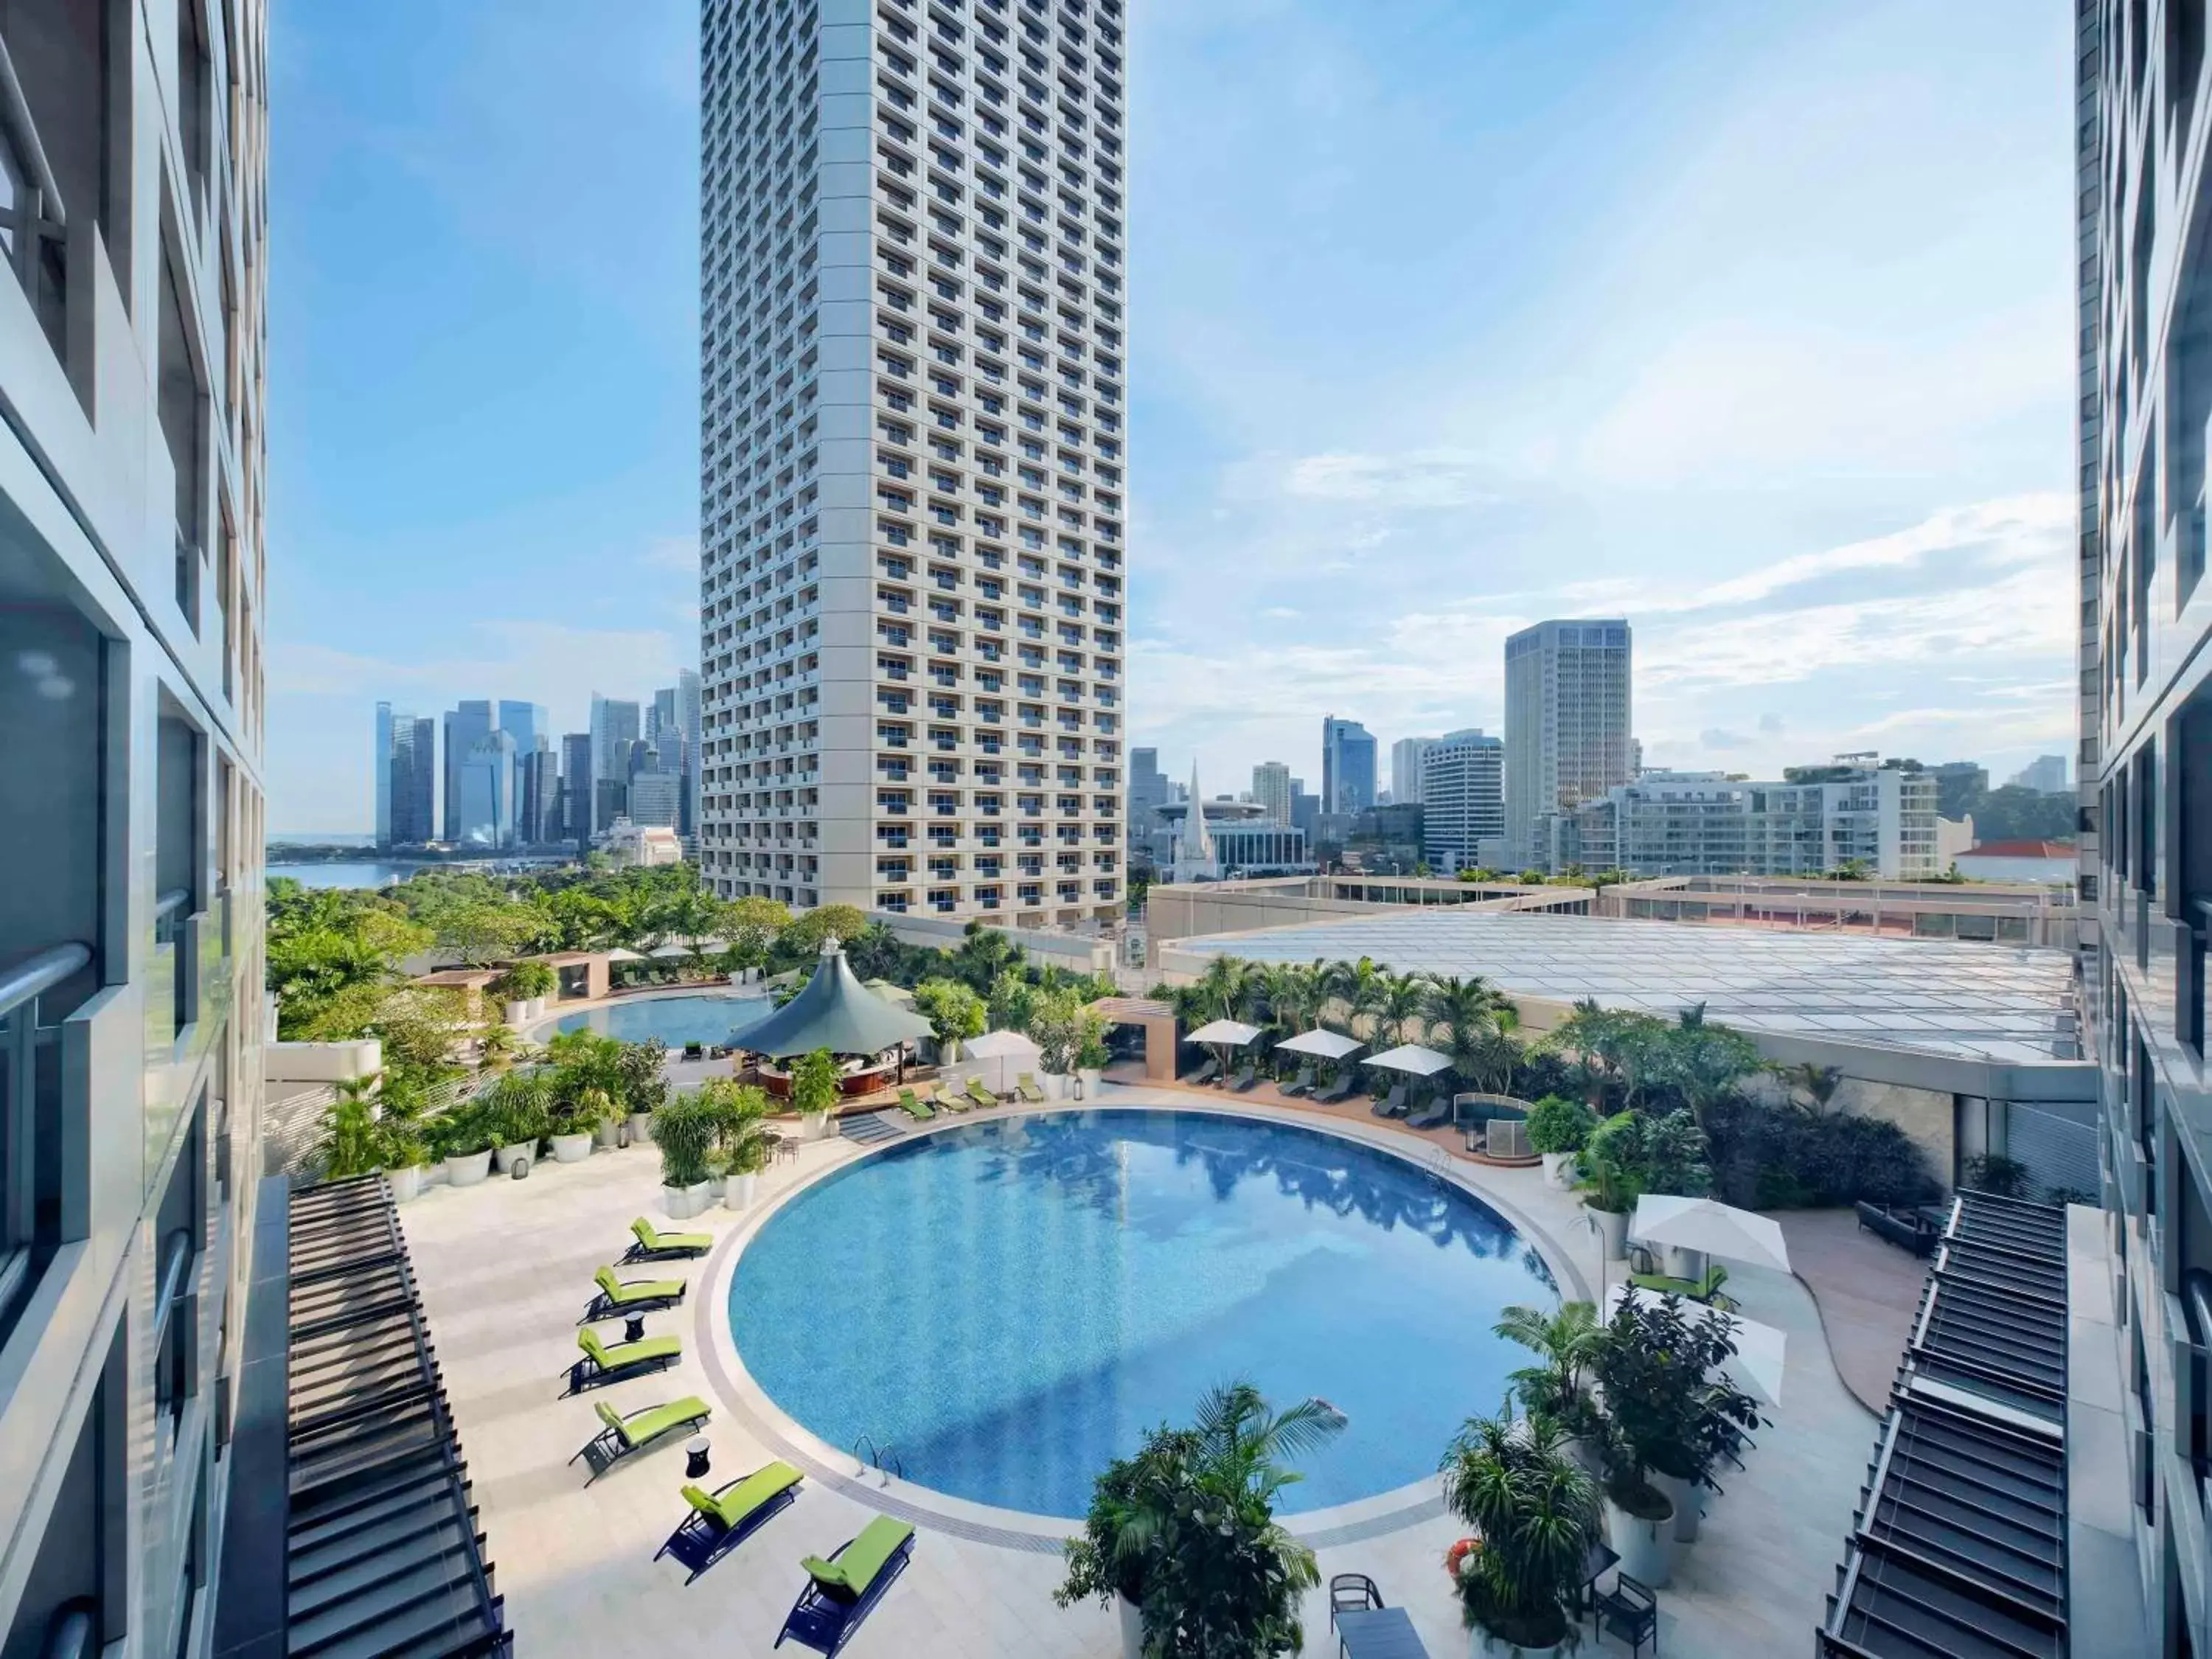 Property building, Pool View in Fairmont Singapore